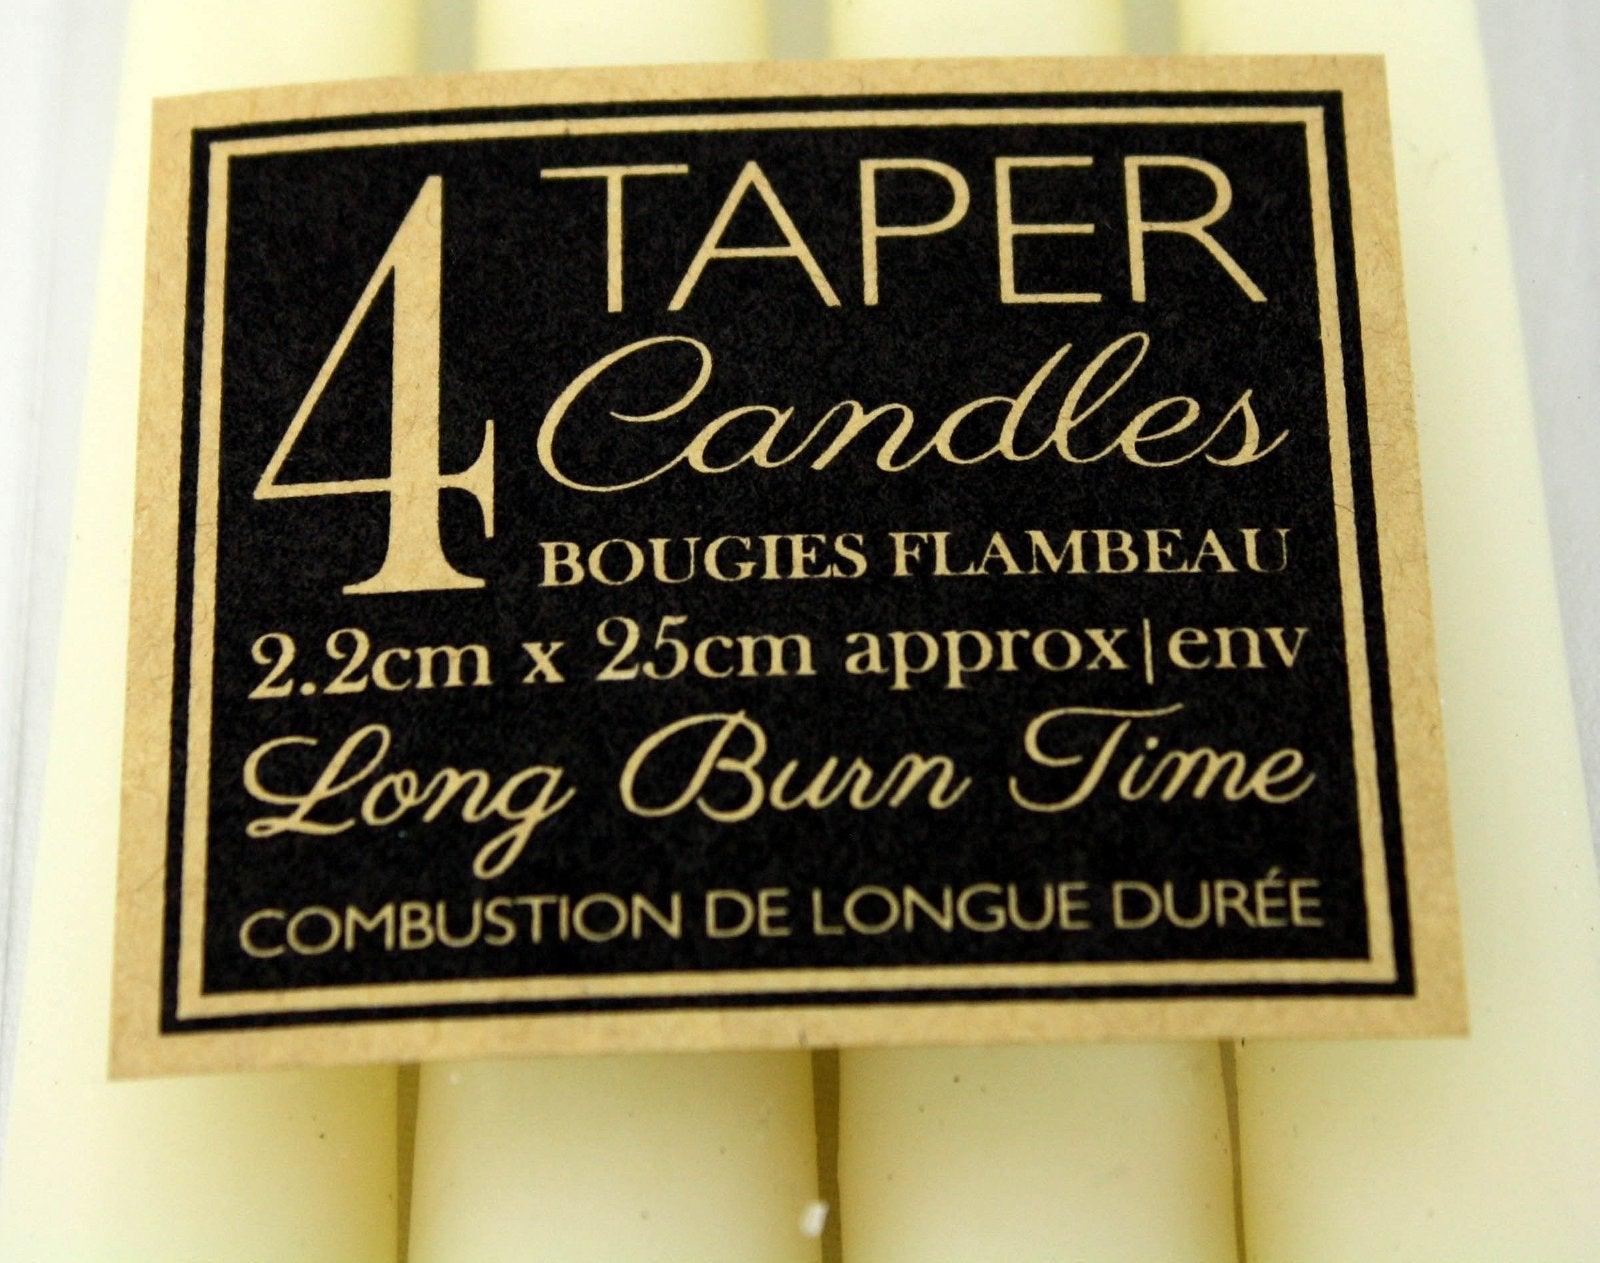 Set Of 4 Ivory Taper Candles-Candles